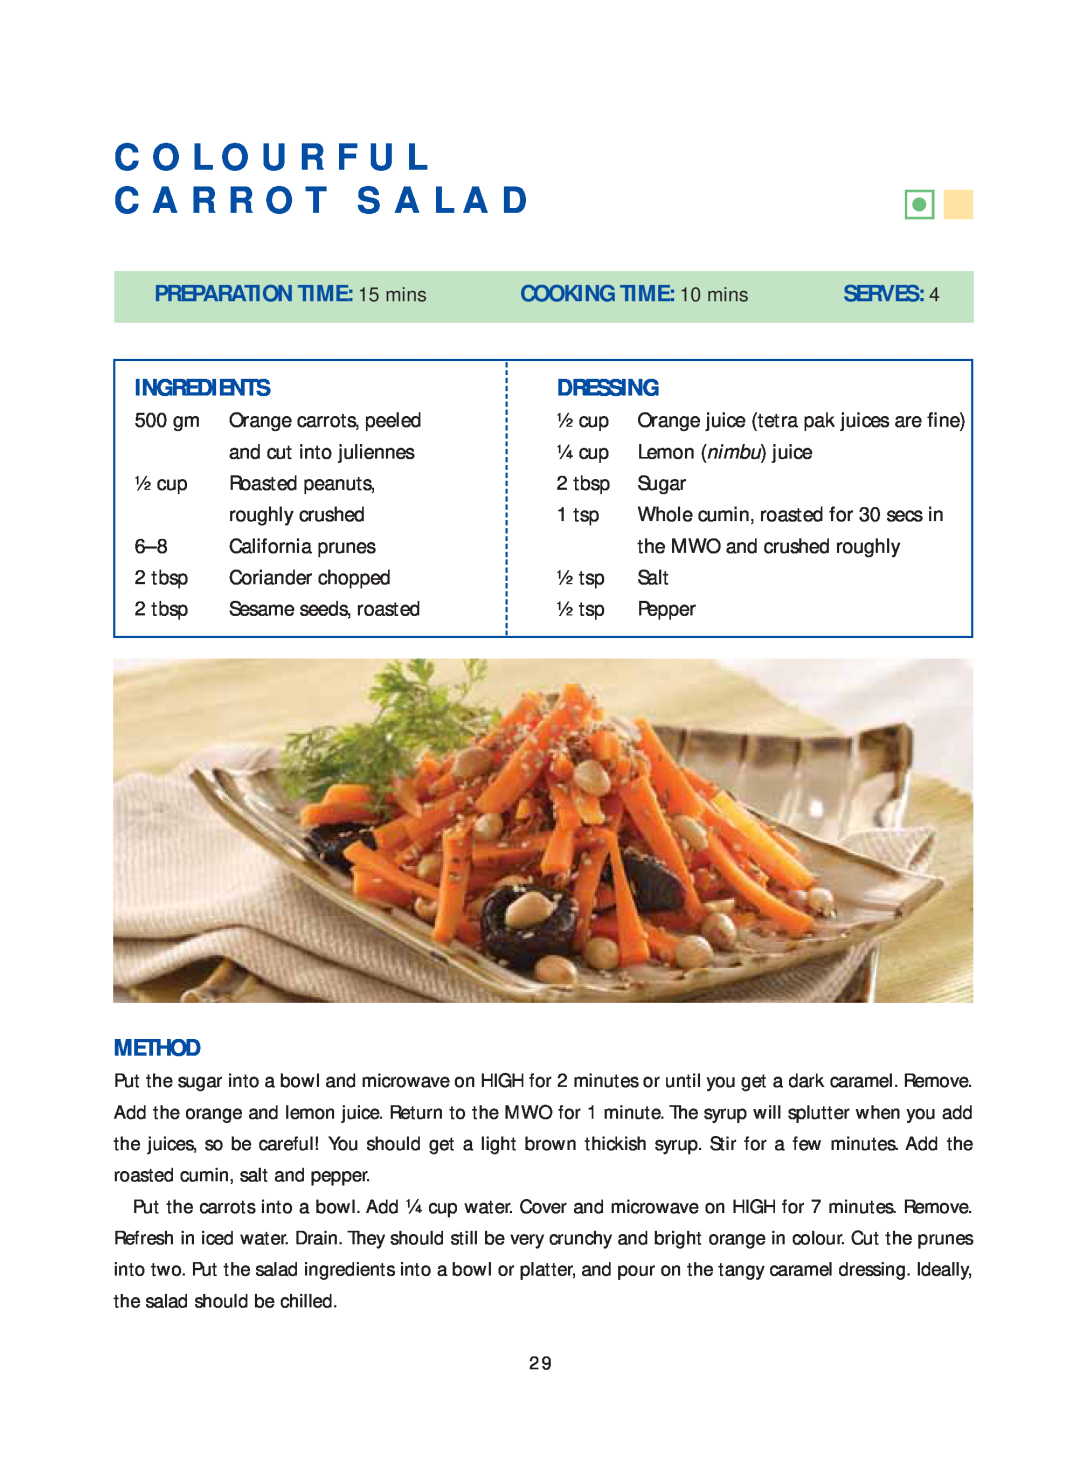 Samsung Microwave Oven Colourful Carrot Salad, PREPARATION TIME 15 mins, COOKING TIME: 10 mins, Serves, Ingredients 